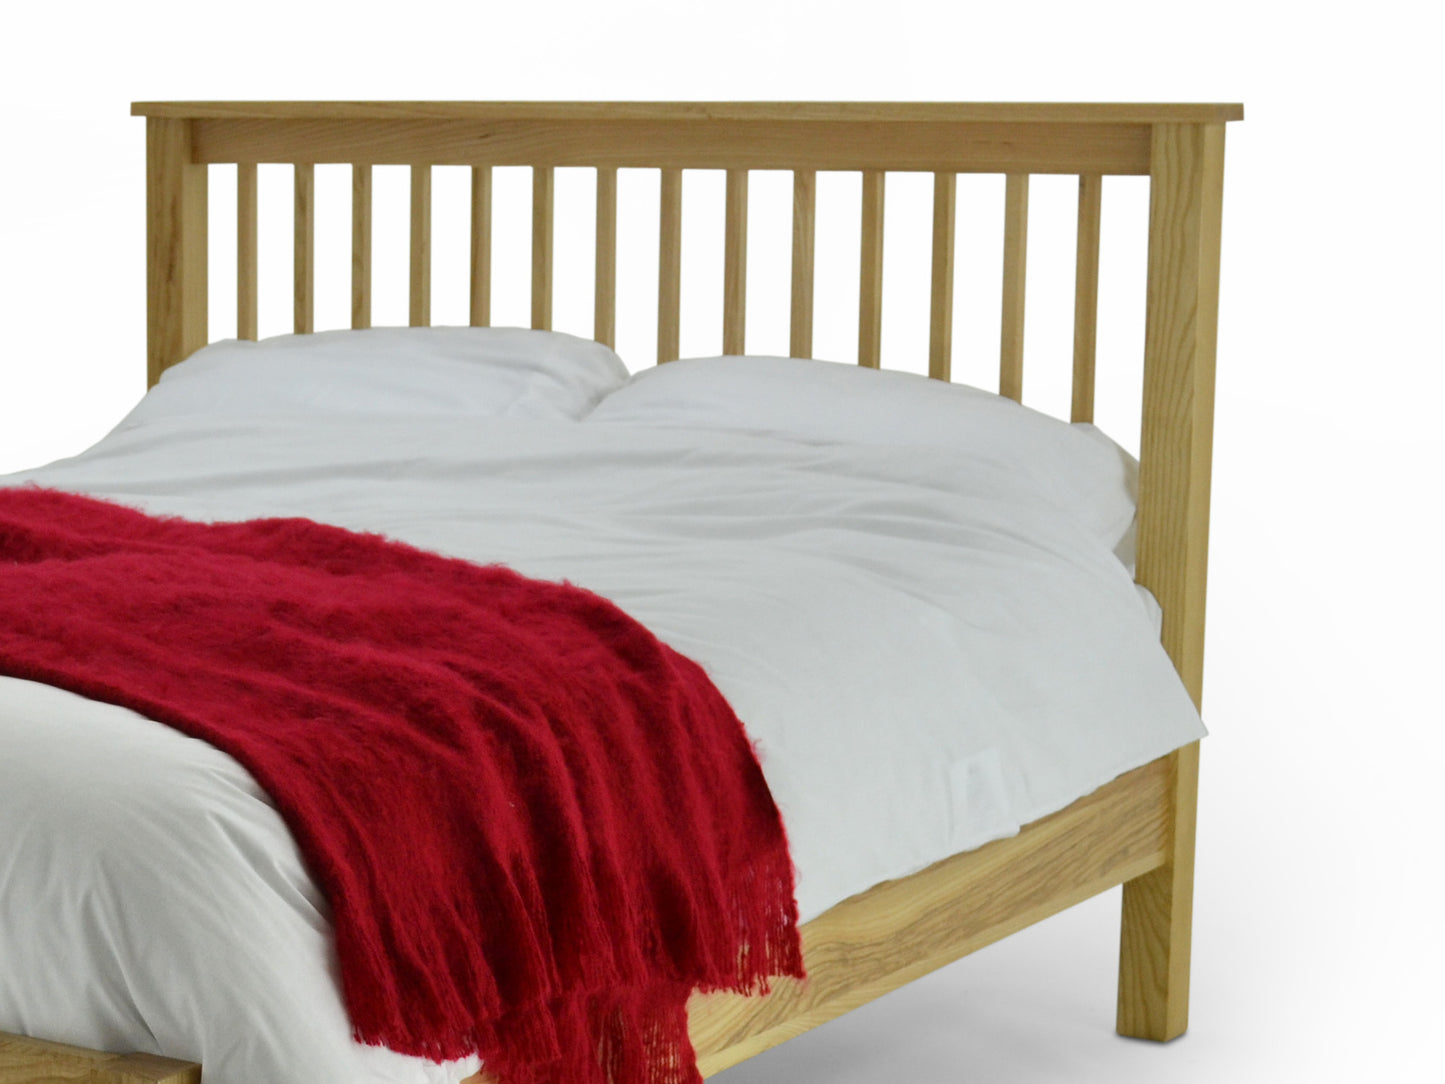 Ashmere Luxury Bed Frame in Solid Oak